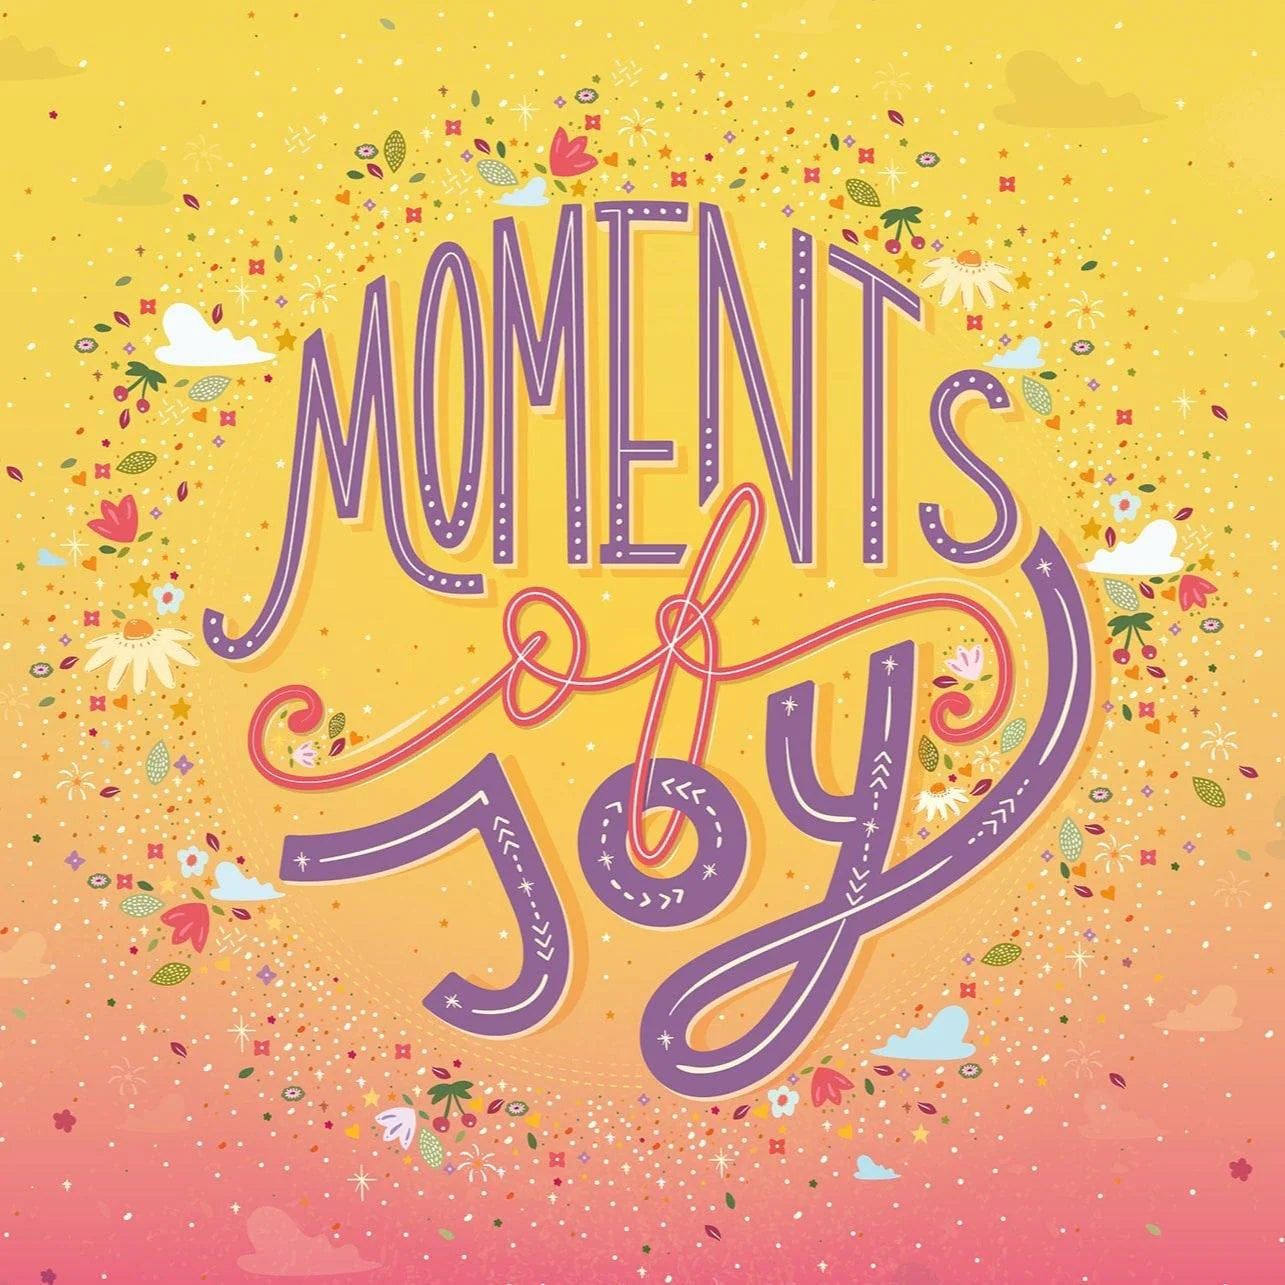 Moments-of-Joy-Short-Story-Collection-Book-9102.webp__PID:66a19556-db2a-414c-be33-548eeeb0154b